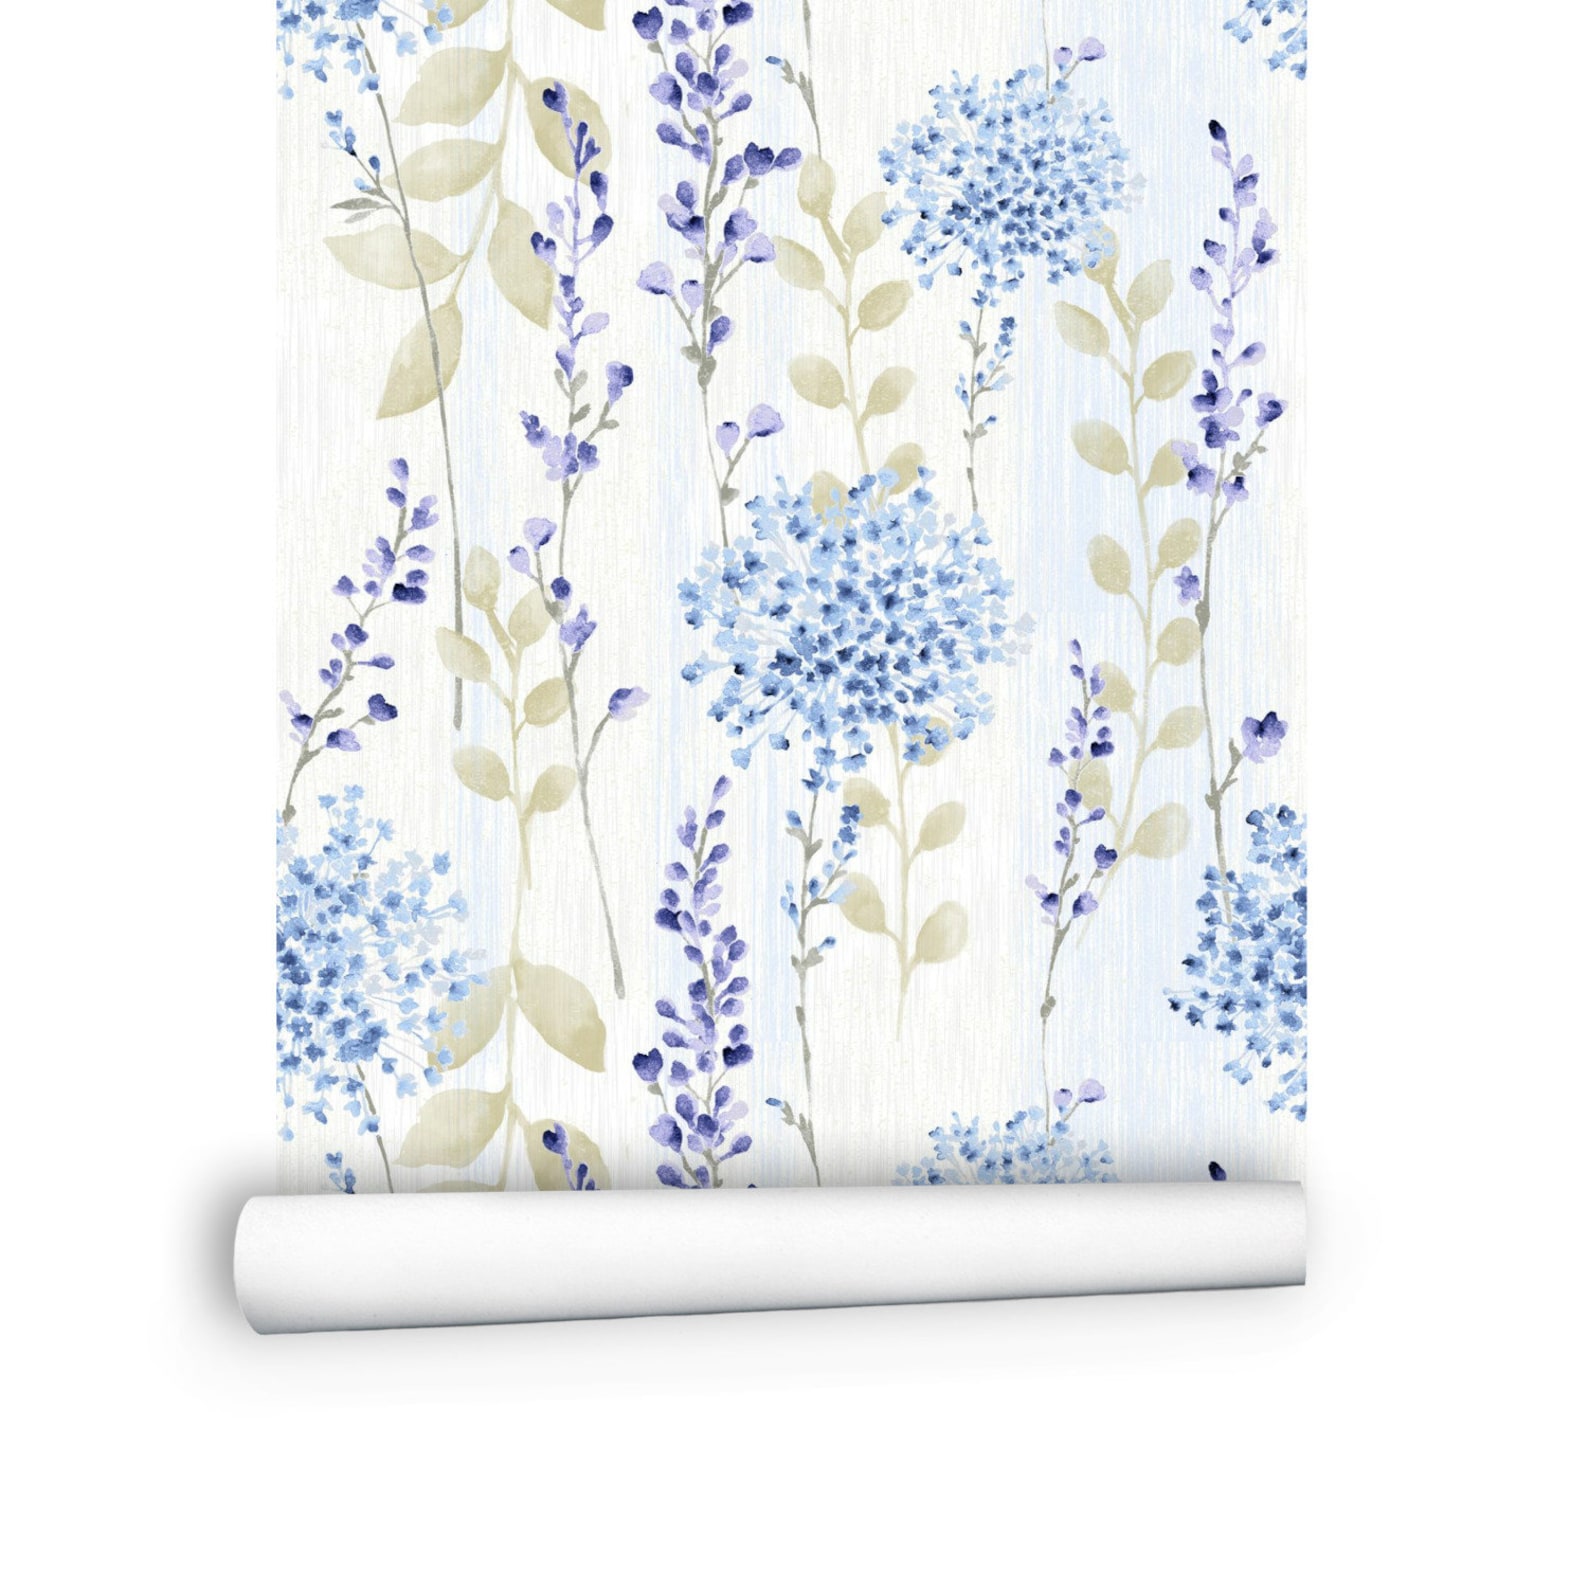 Wildflowers Wallpaper Blue and White Watercolor Botanical | Etsy